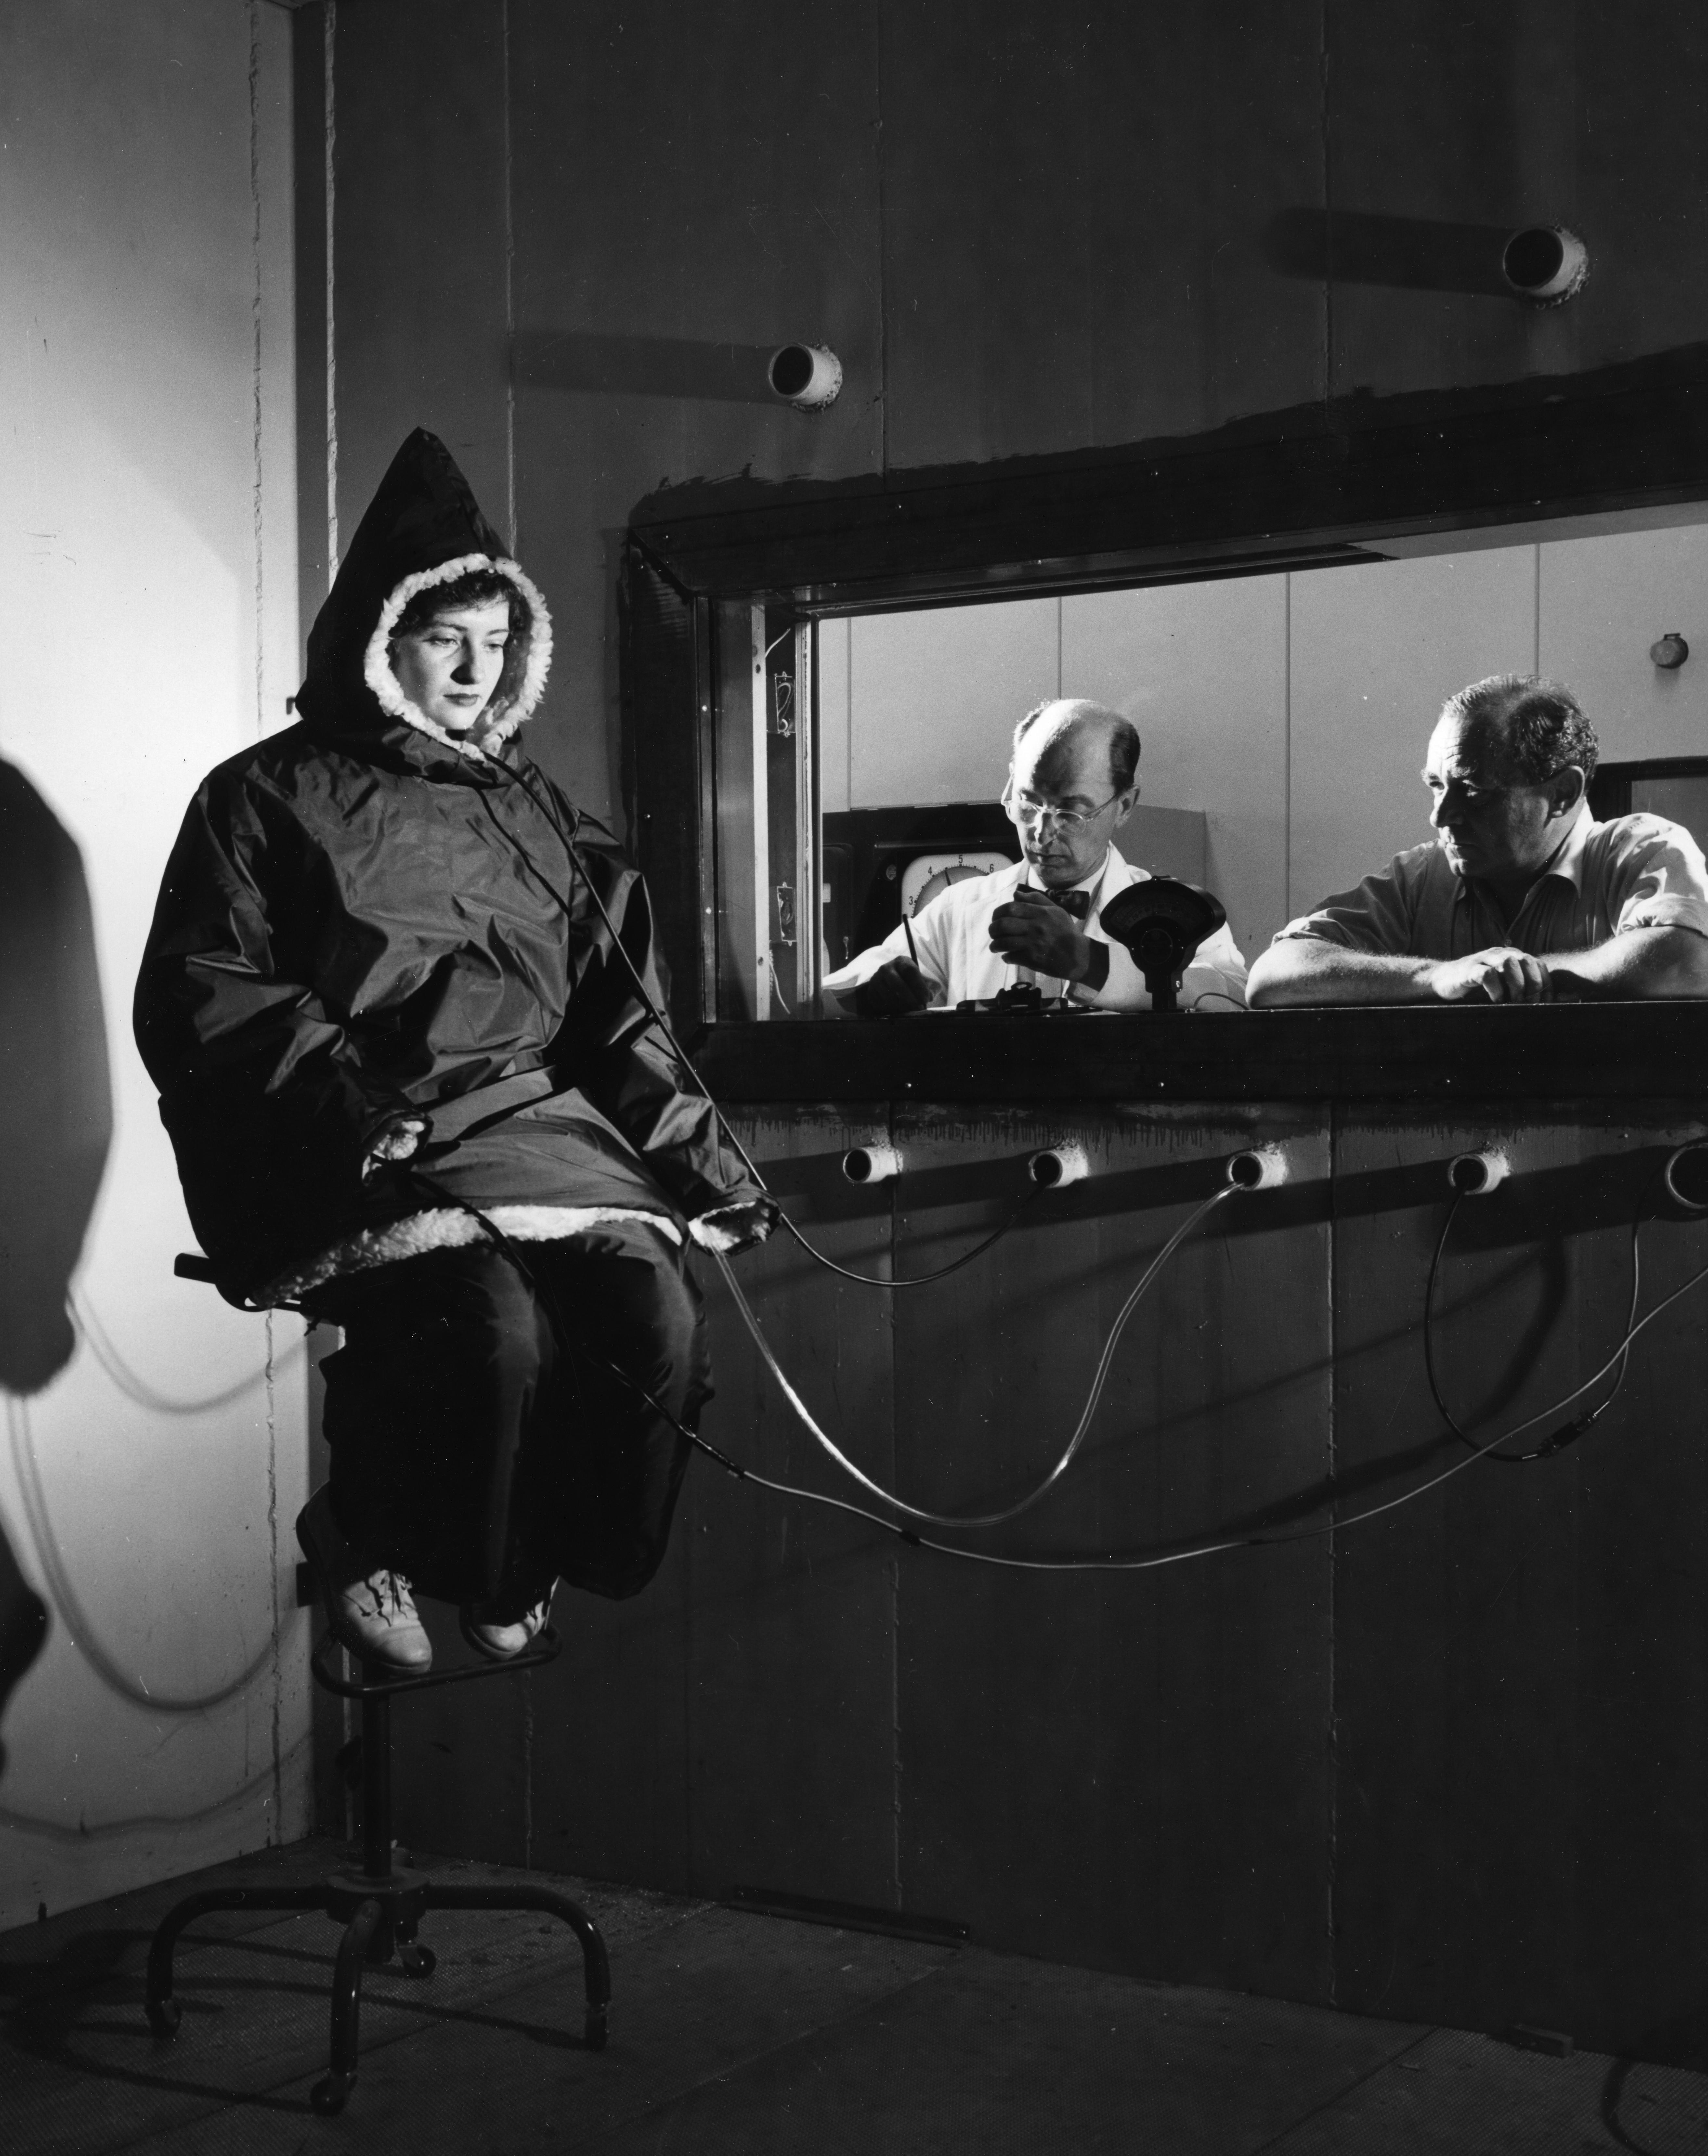 Black and white image of a woman in a large parka seated in a laboratory while two researchers observe behind a viewing window.